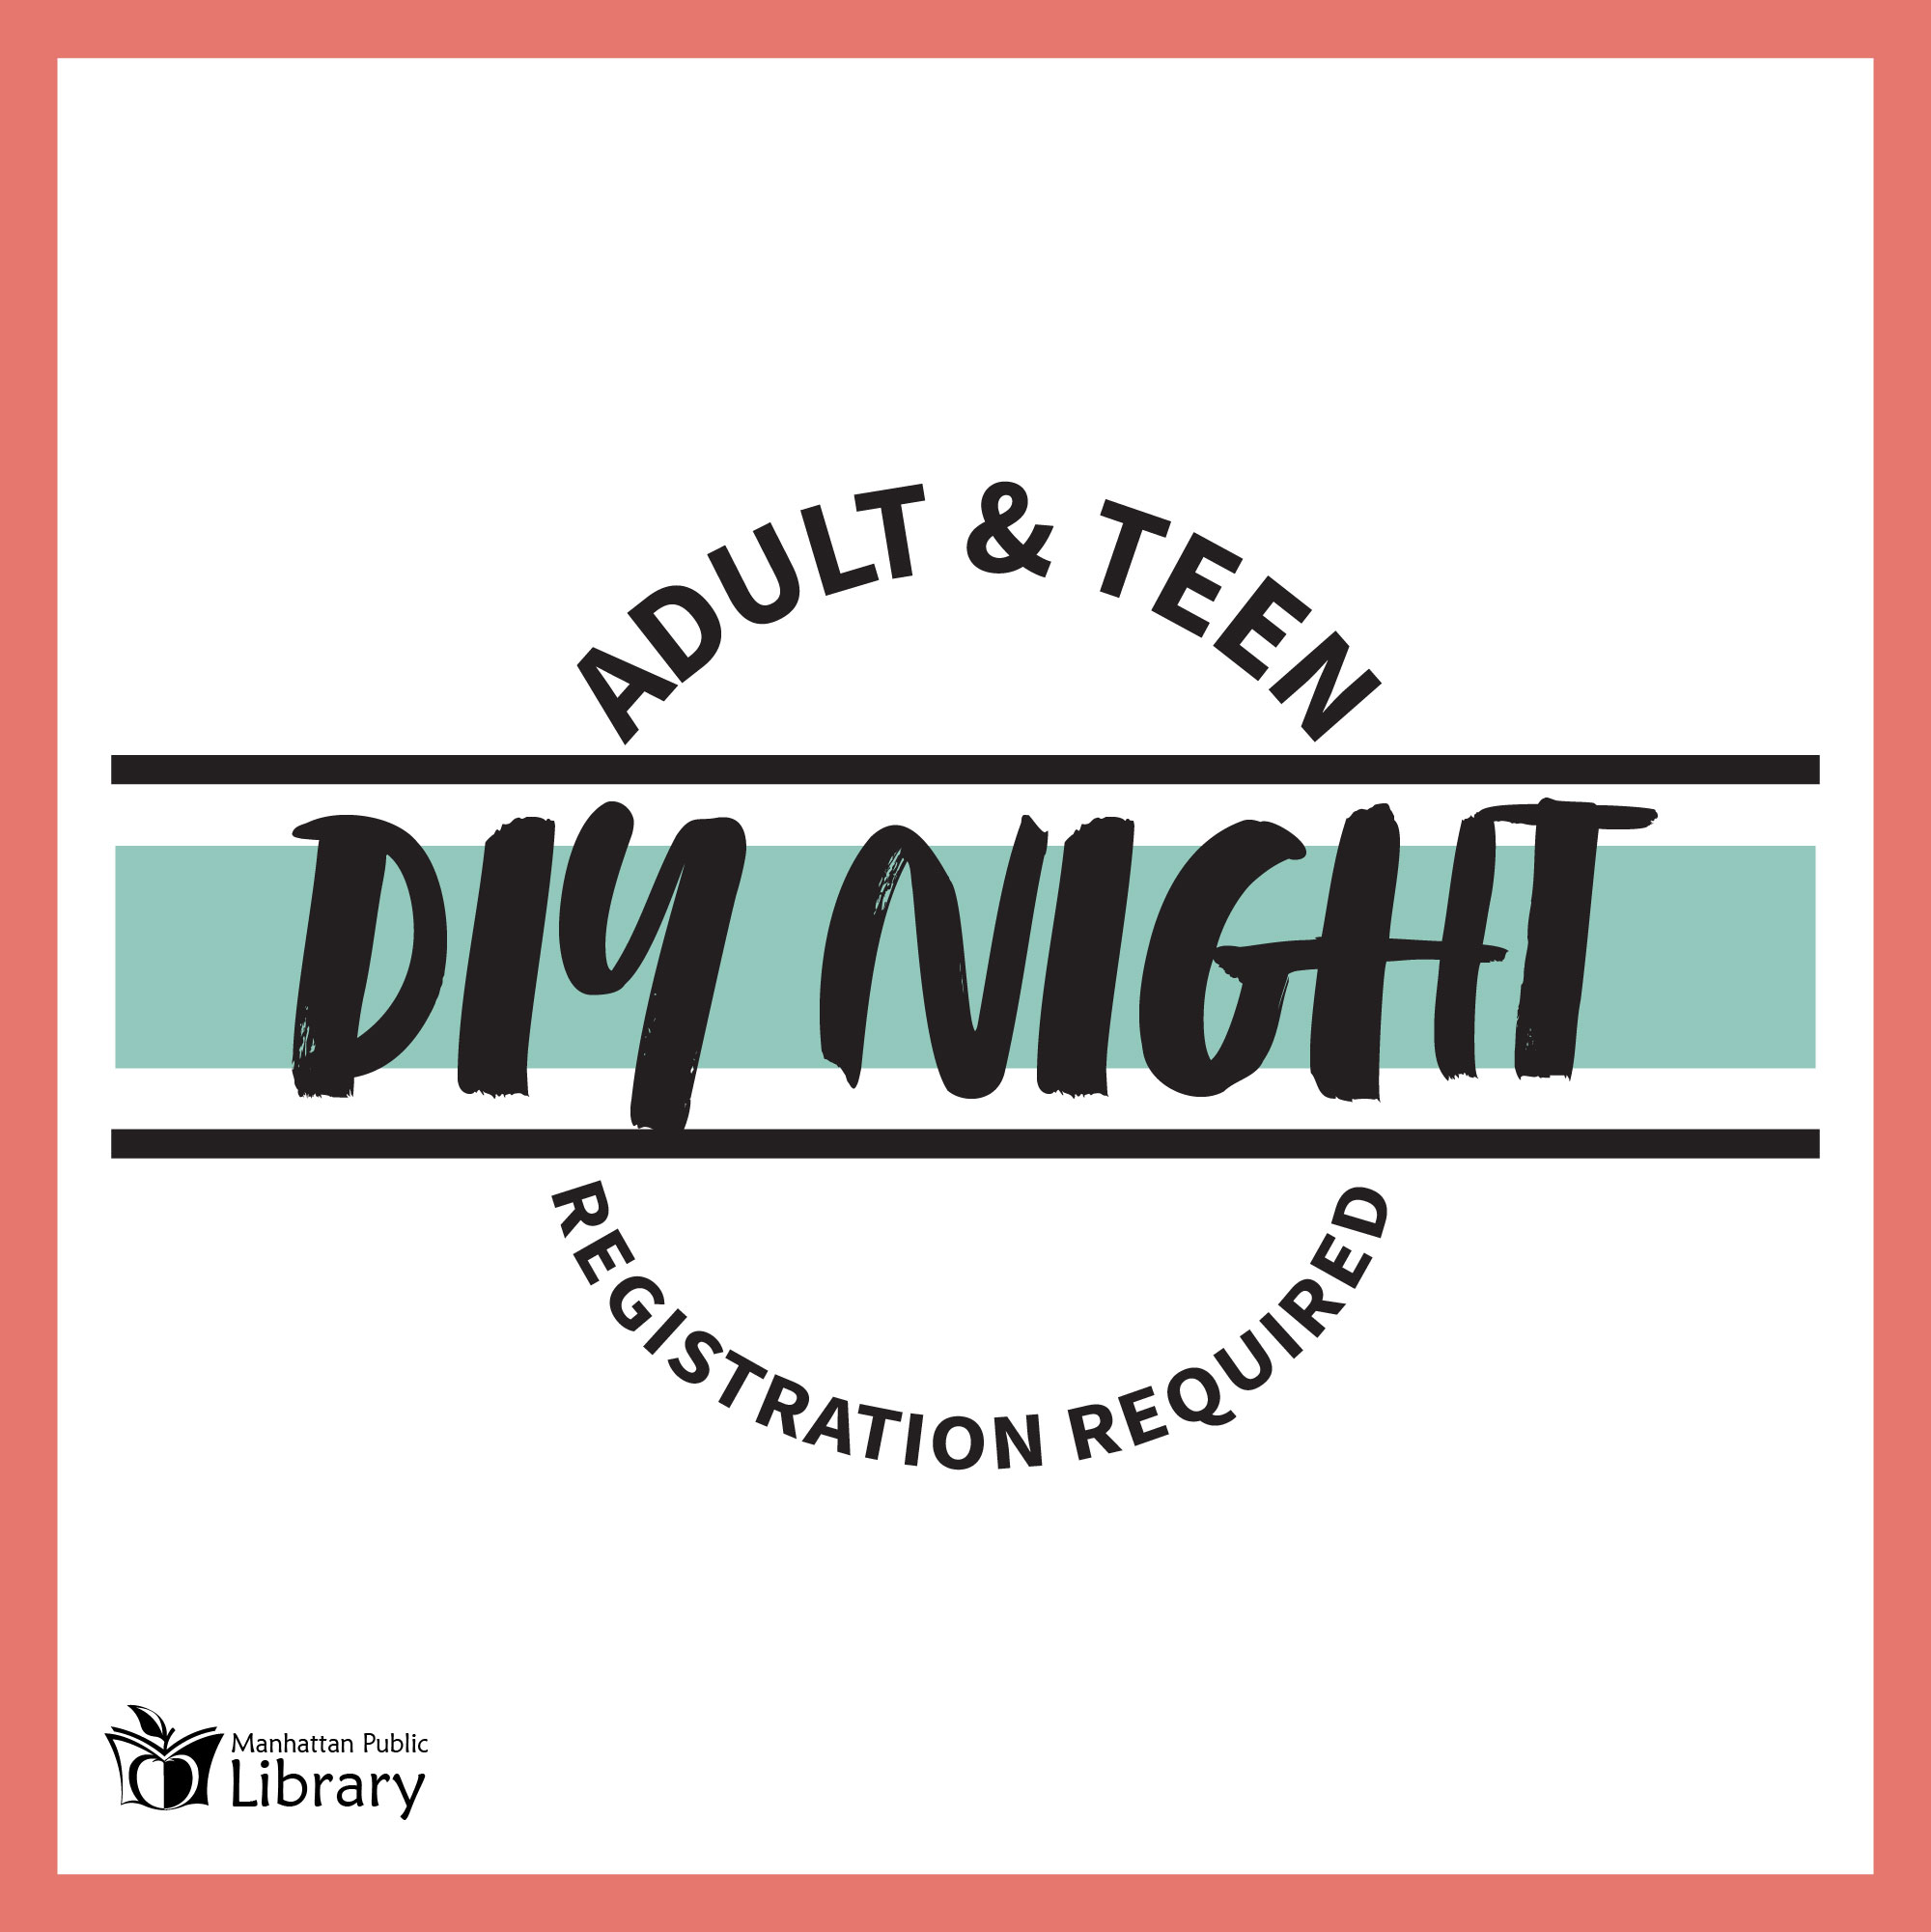 Adult & Teen DIY Night Registration Required